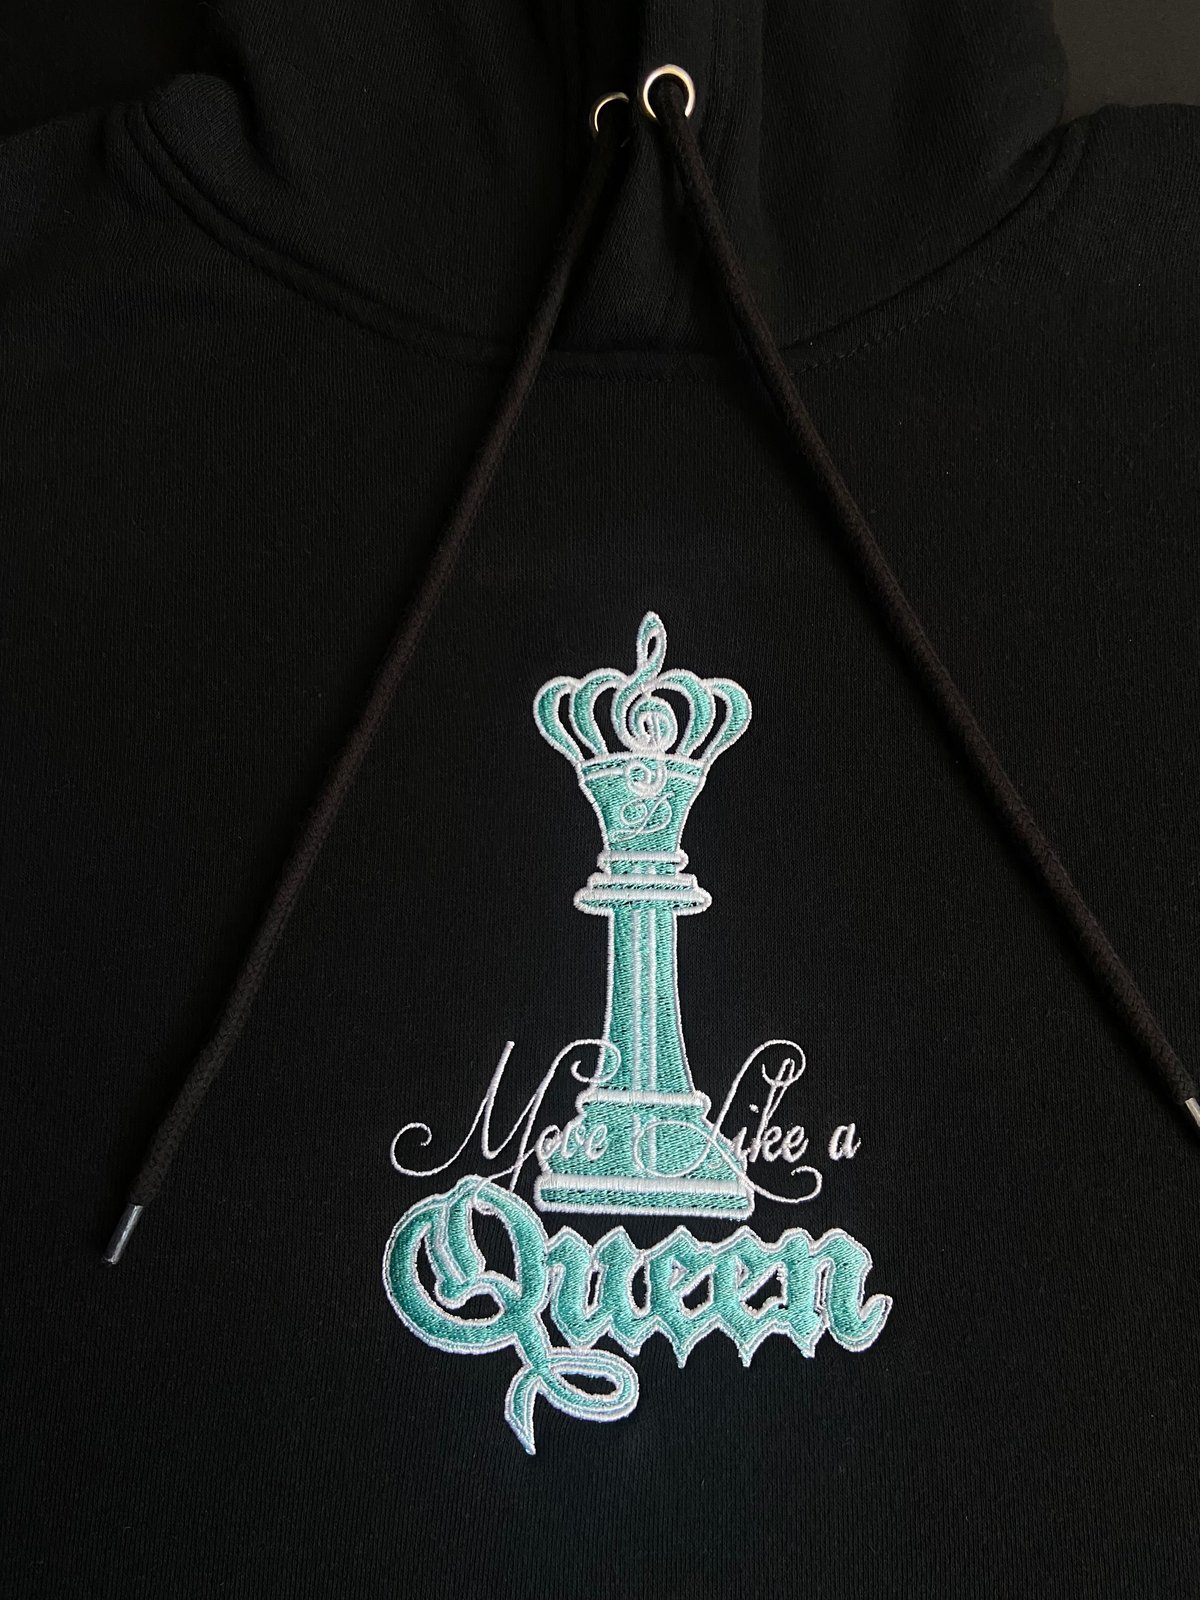 Image of "Move Like A Queen" Chess Piece & D's Logo Crown Embroidered on Hoodies